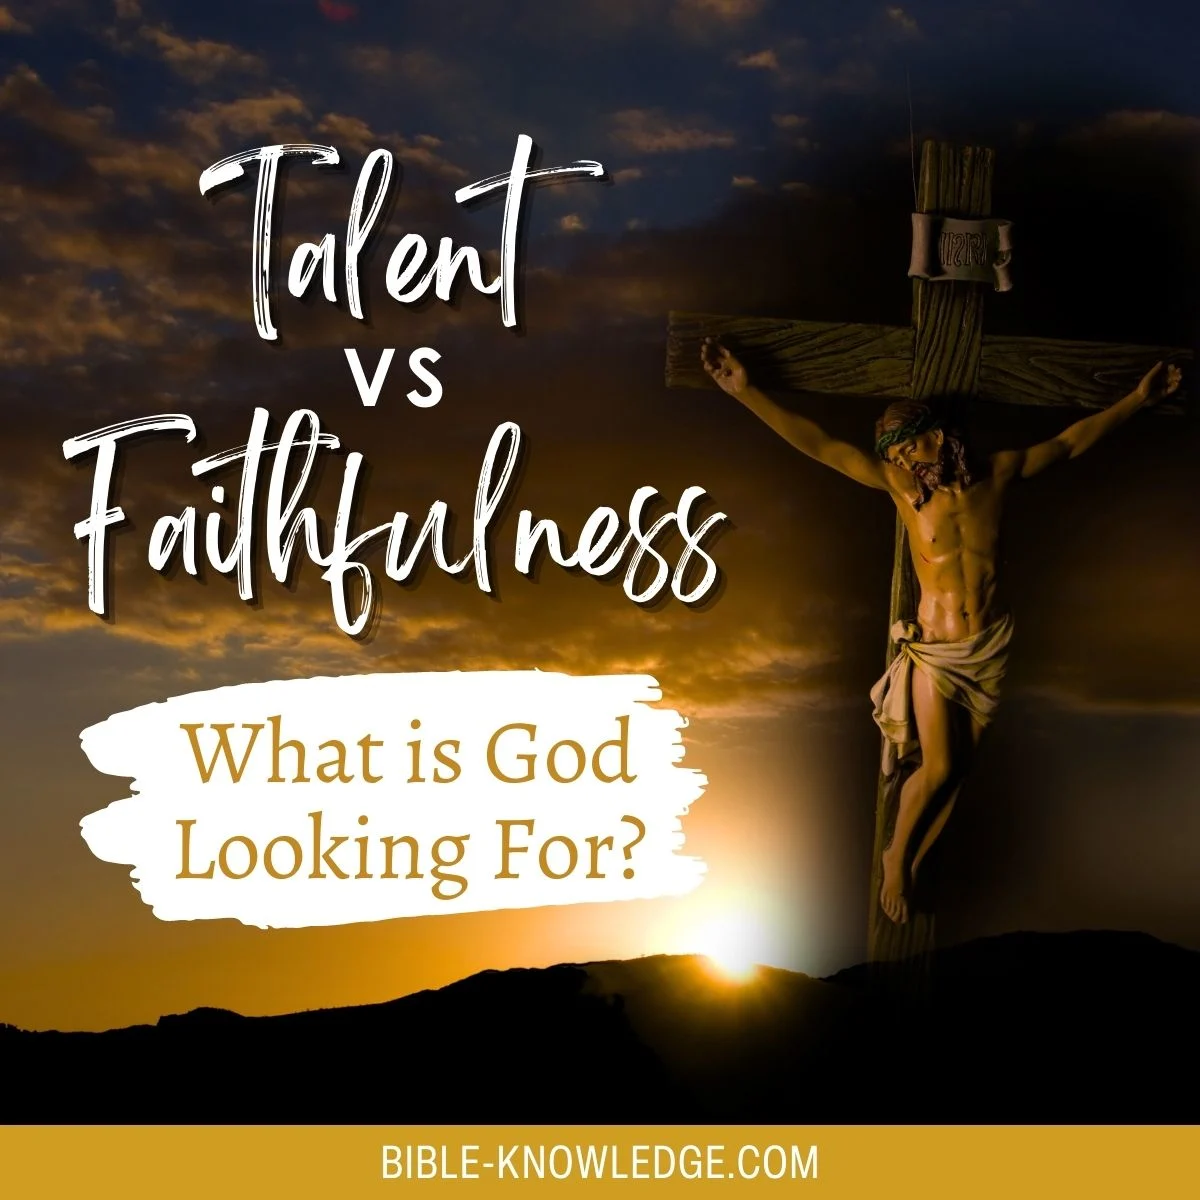 Talent vs. Faithfulness: What is God Looking For?